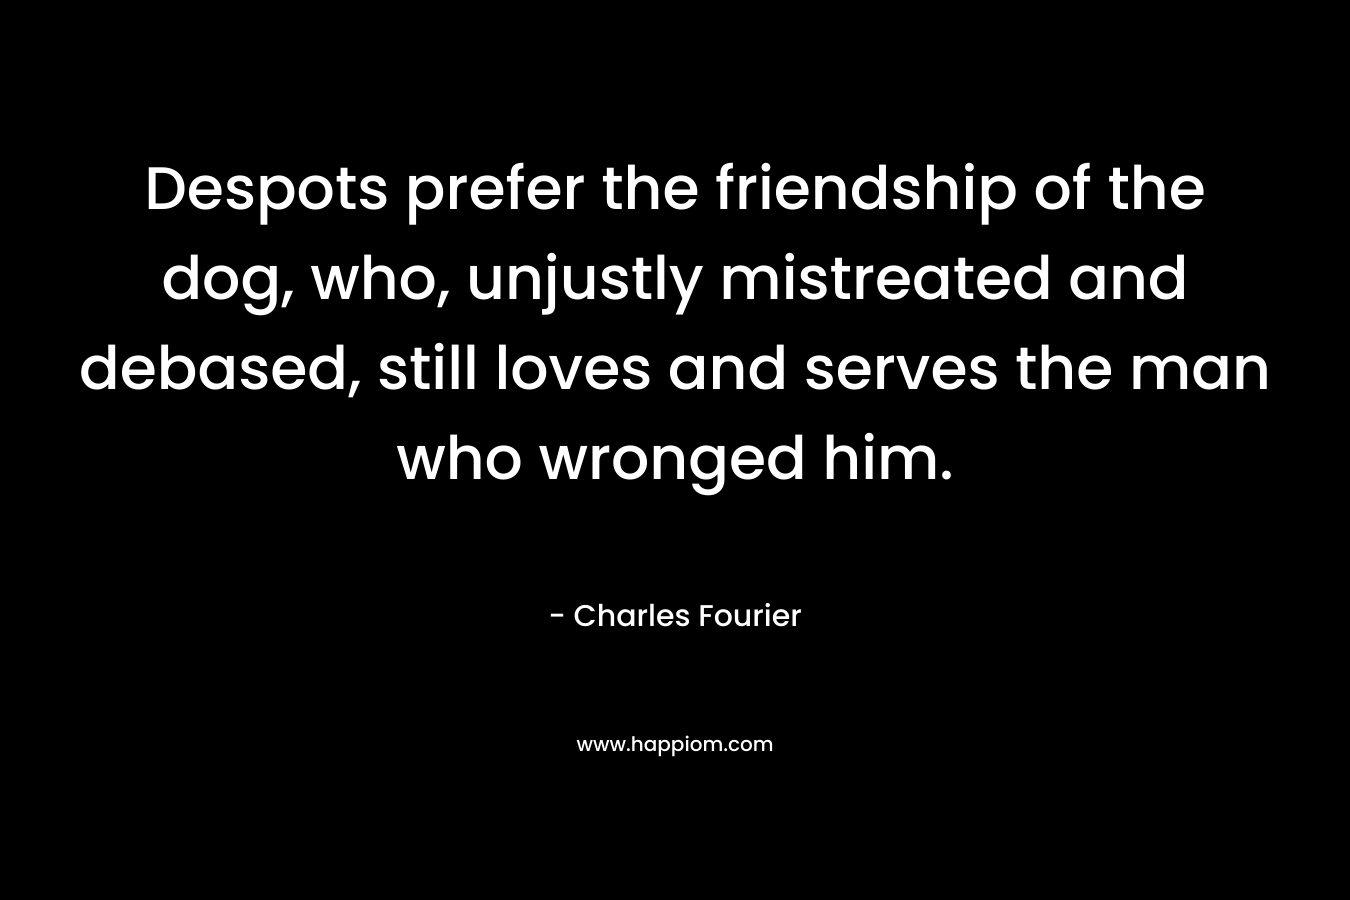 Despots prefer the friendship of the dog, who, unjustly mistreated and debased, still loves and serves the man who wronged him. – Charles Fourier